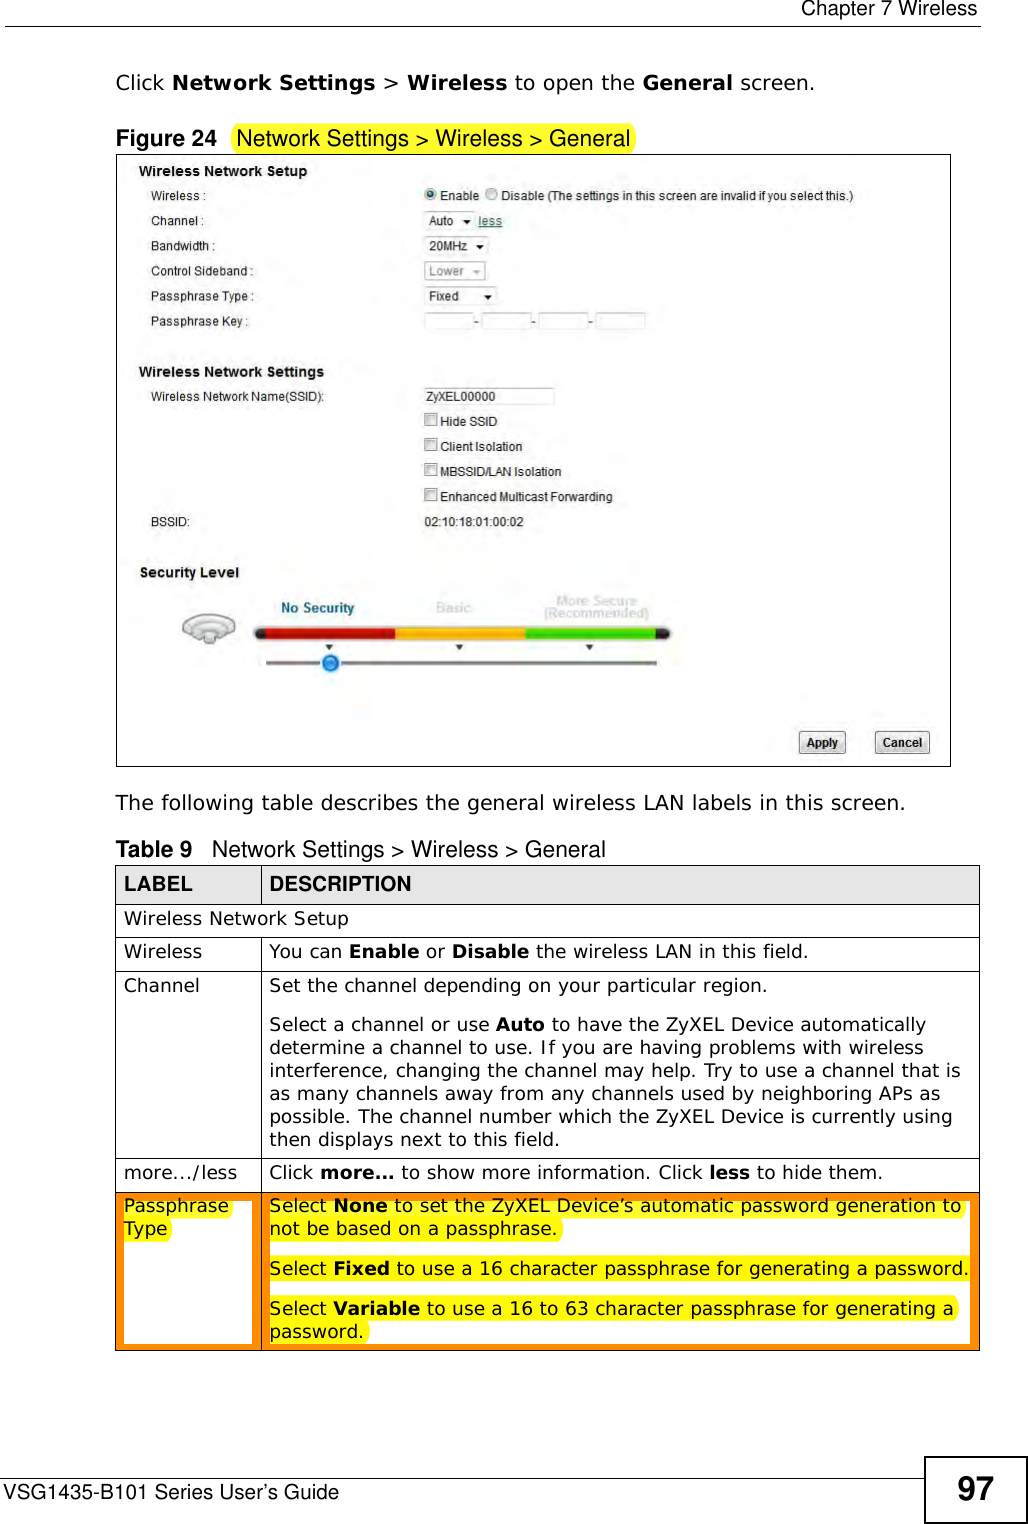  Chapter 7 WirelessVSG1435-B101 Series User’s Guide 97Click Network Settings &gt; Wireless to open the General screen.Figure 24   Network Settings &gt; Wireless &gt; General The following table describes the general wireless LAN labels in this screen.Table 9   Network Settings &gt; Wireless &gt; GeneralLABEL DESCRIPTIONWireless Network SetupWireless You can Enable or Disable the wireless LAN in this field.Channel  Set the channel depending on your particular region.Select a channel or use Auto to have the ZyXEL Device automatically determine a channel to use. If you are having problems with wireless interference, changing the channel may help. Try to use a channel that is as many channels away from any channels used by neighboring APs as possible. The channel number which the ZyXEL Device is currently using then displays next to this field.more.../less Click more... to show more information. Click less to hide them.Passphrase Type Select None to set the ZyXEL Device’s automatic password generation to not be based on a passphrase.Select Fixed to use a 16 character passphrase for generating a password.Select Variable to use a 16 to 63 character passphrase for generating a password.